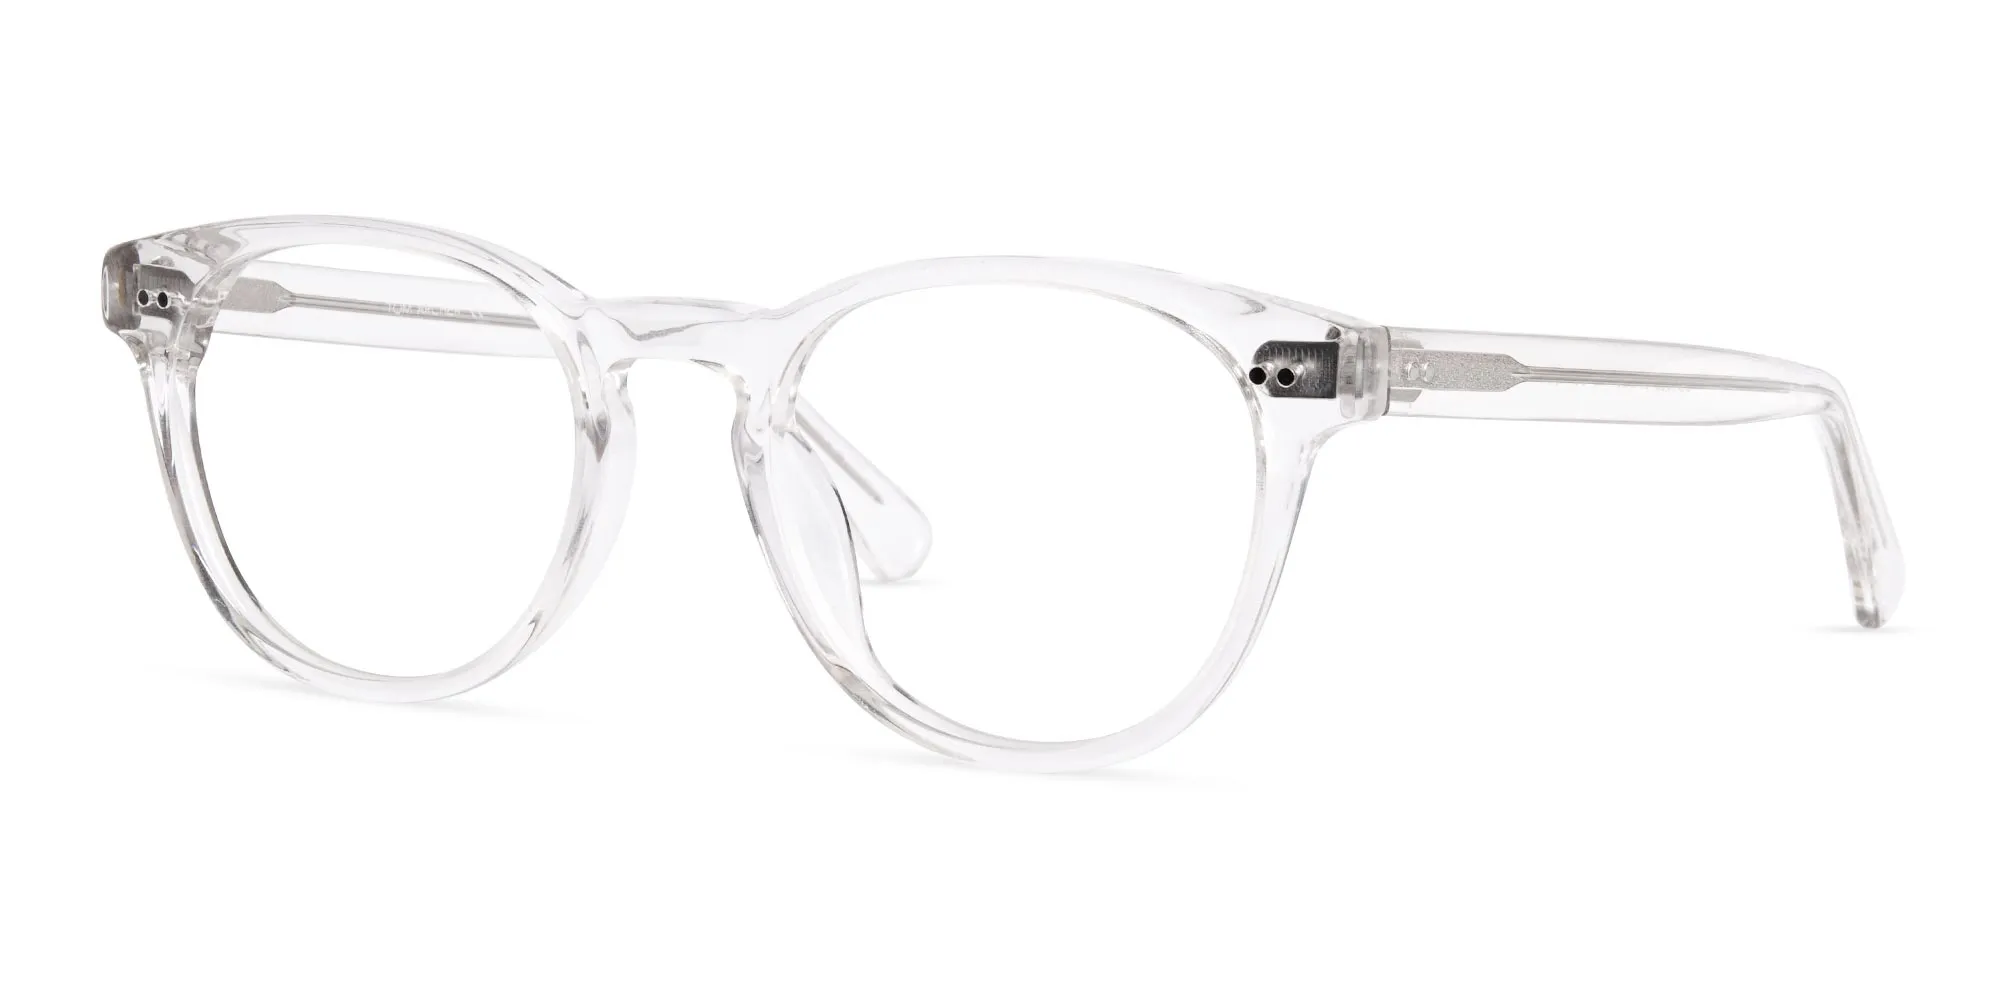 crystal clear and transparent full rim round glasses frames